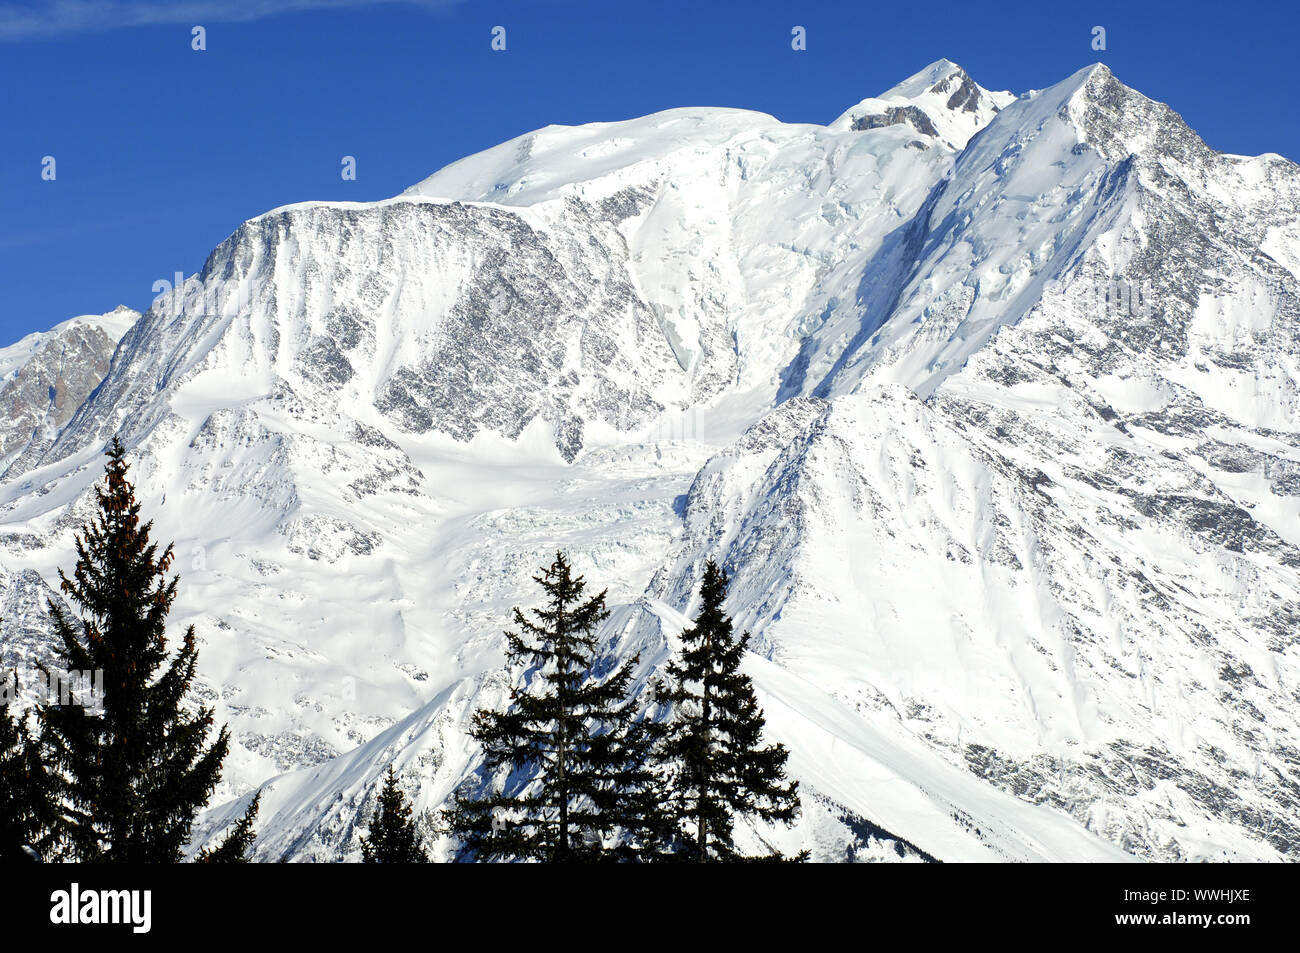 Massif of Mont Blanc, Alps, France Stock Photo